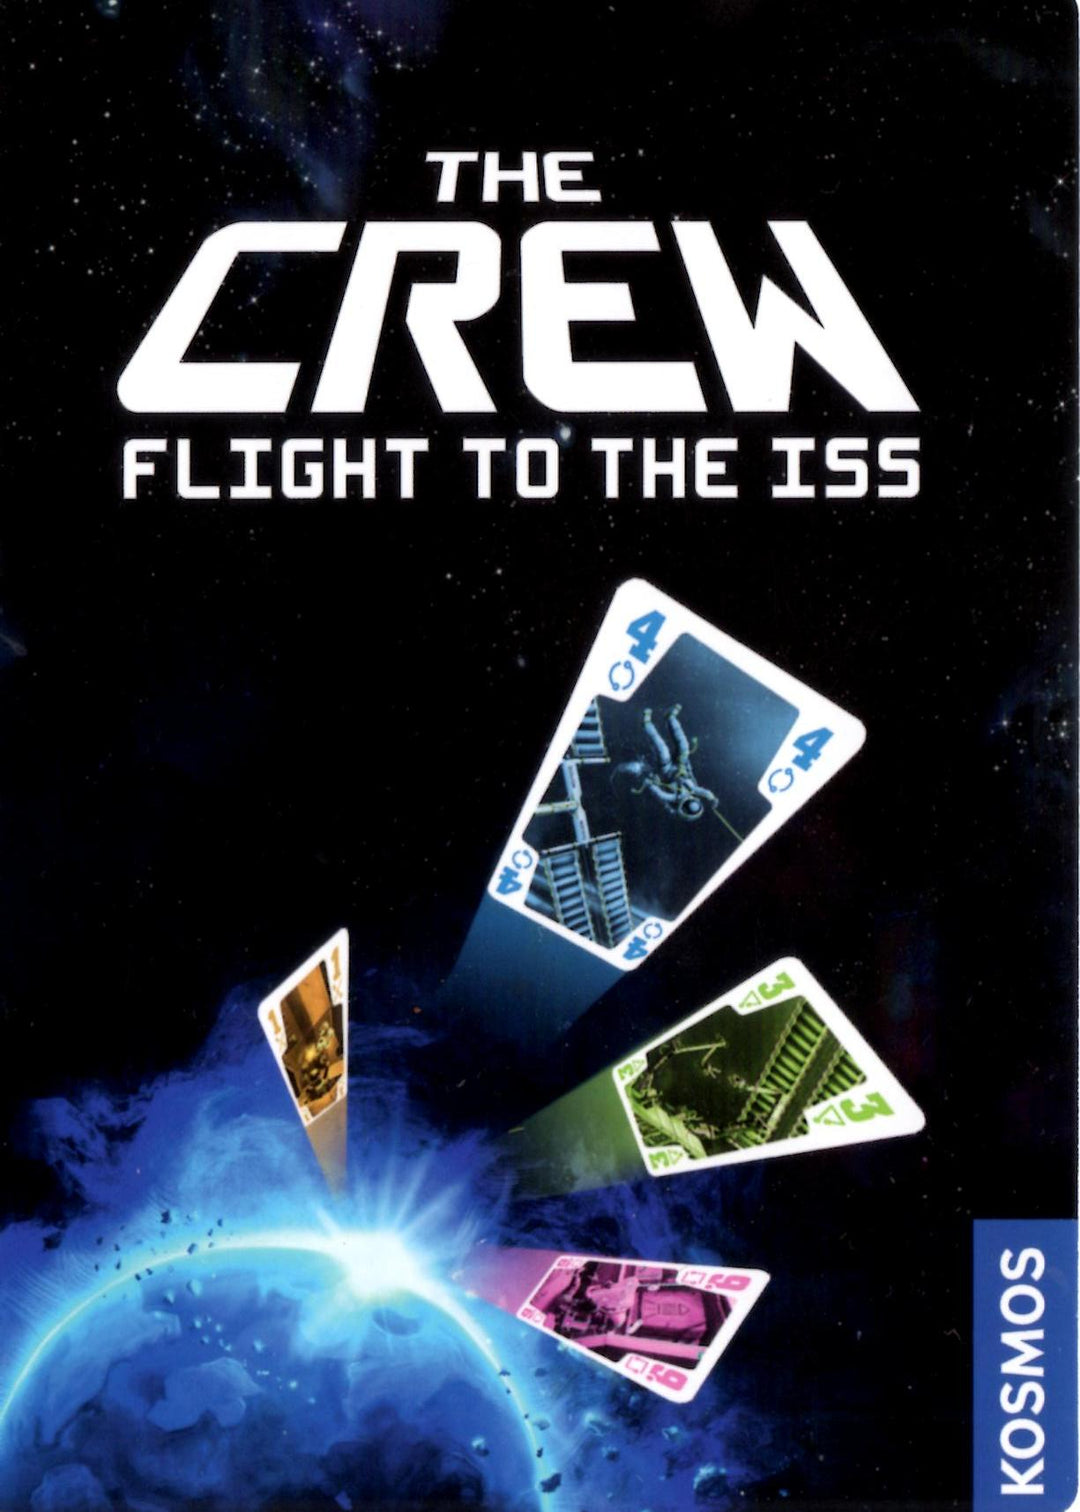 The Crew: The Quest For Planet Nine